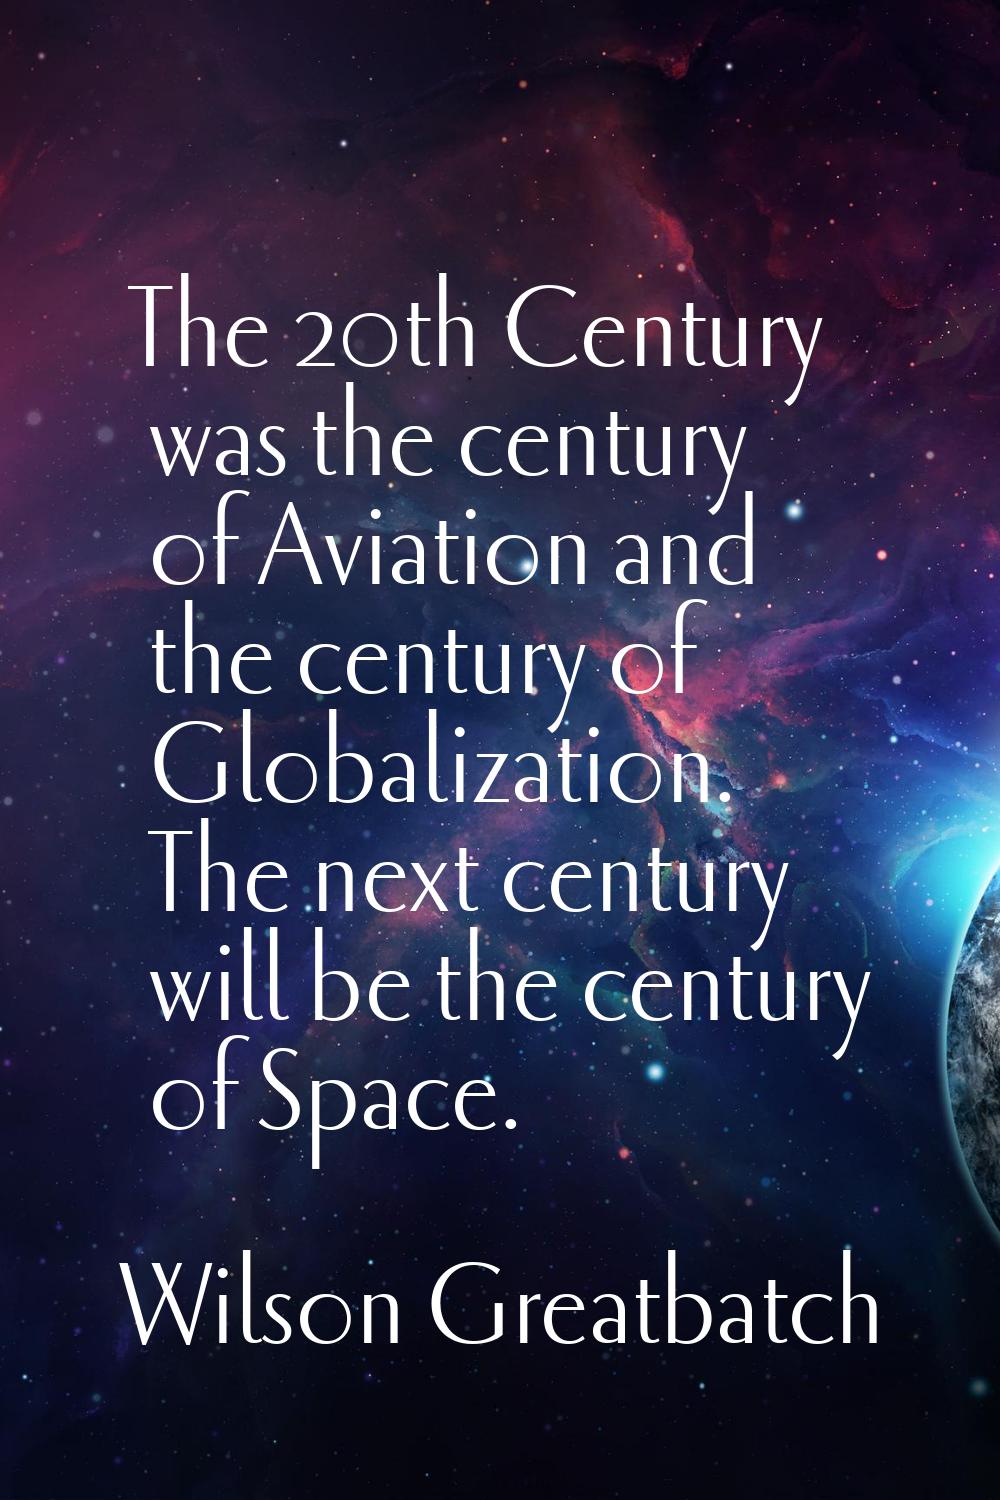 The 20th Century was the century of Aviation and the century of Globalization. The next century wil